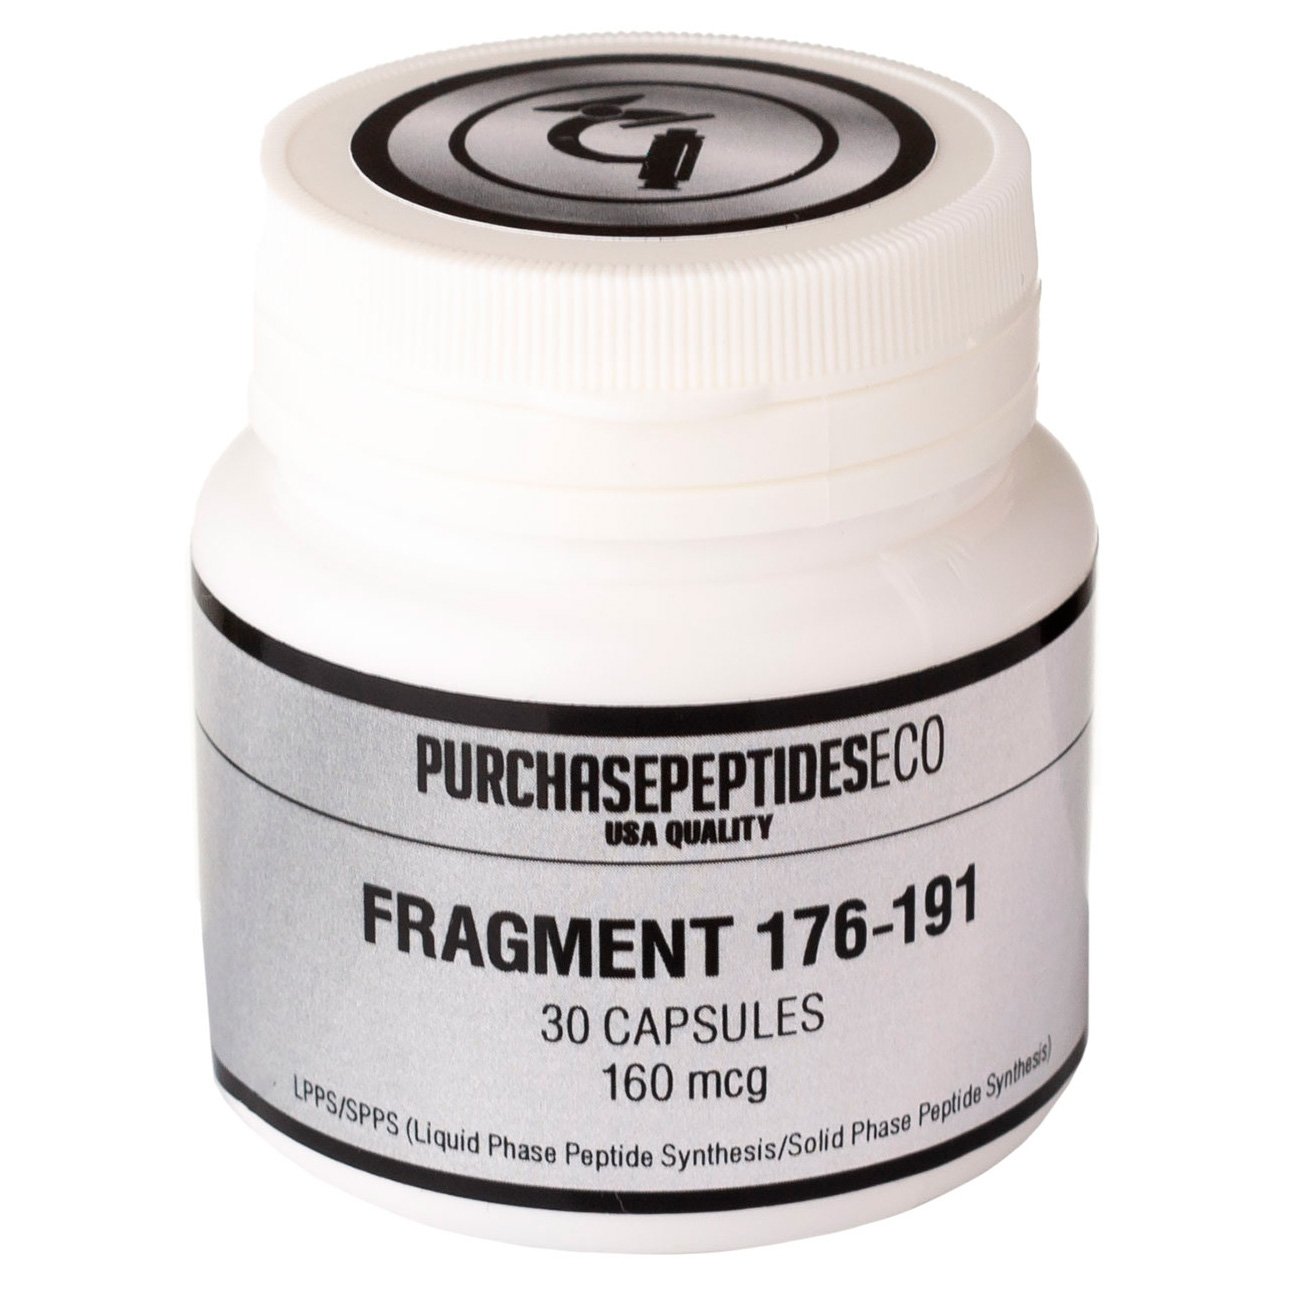 PurchasepeptidesEco HGH Frag 176-191 капсулы, , 